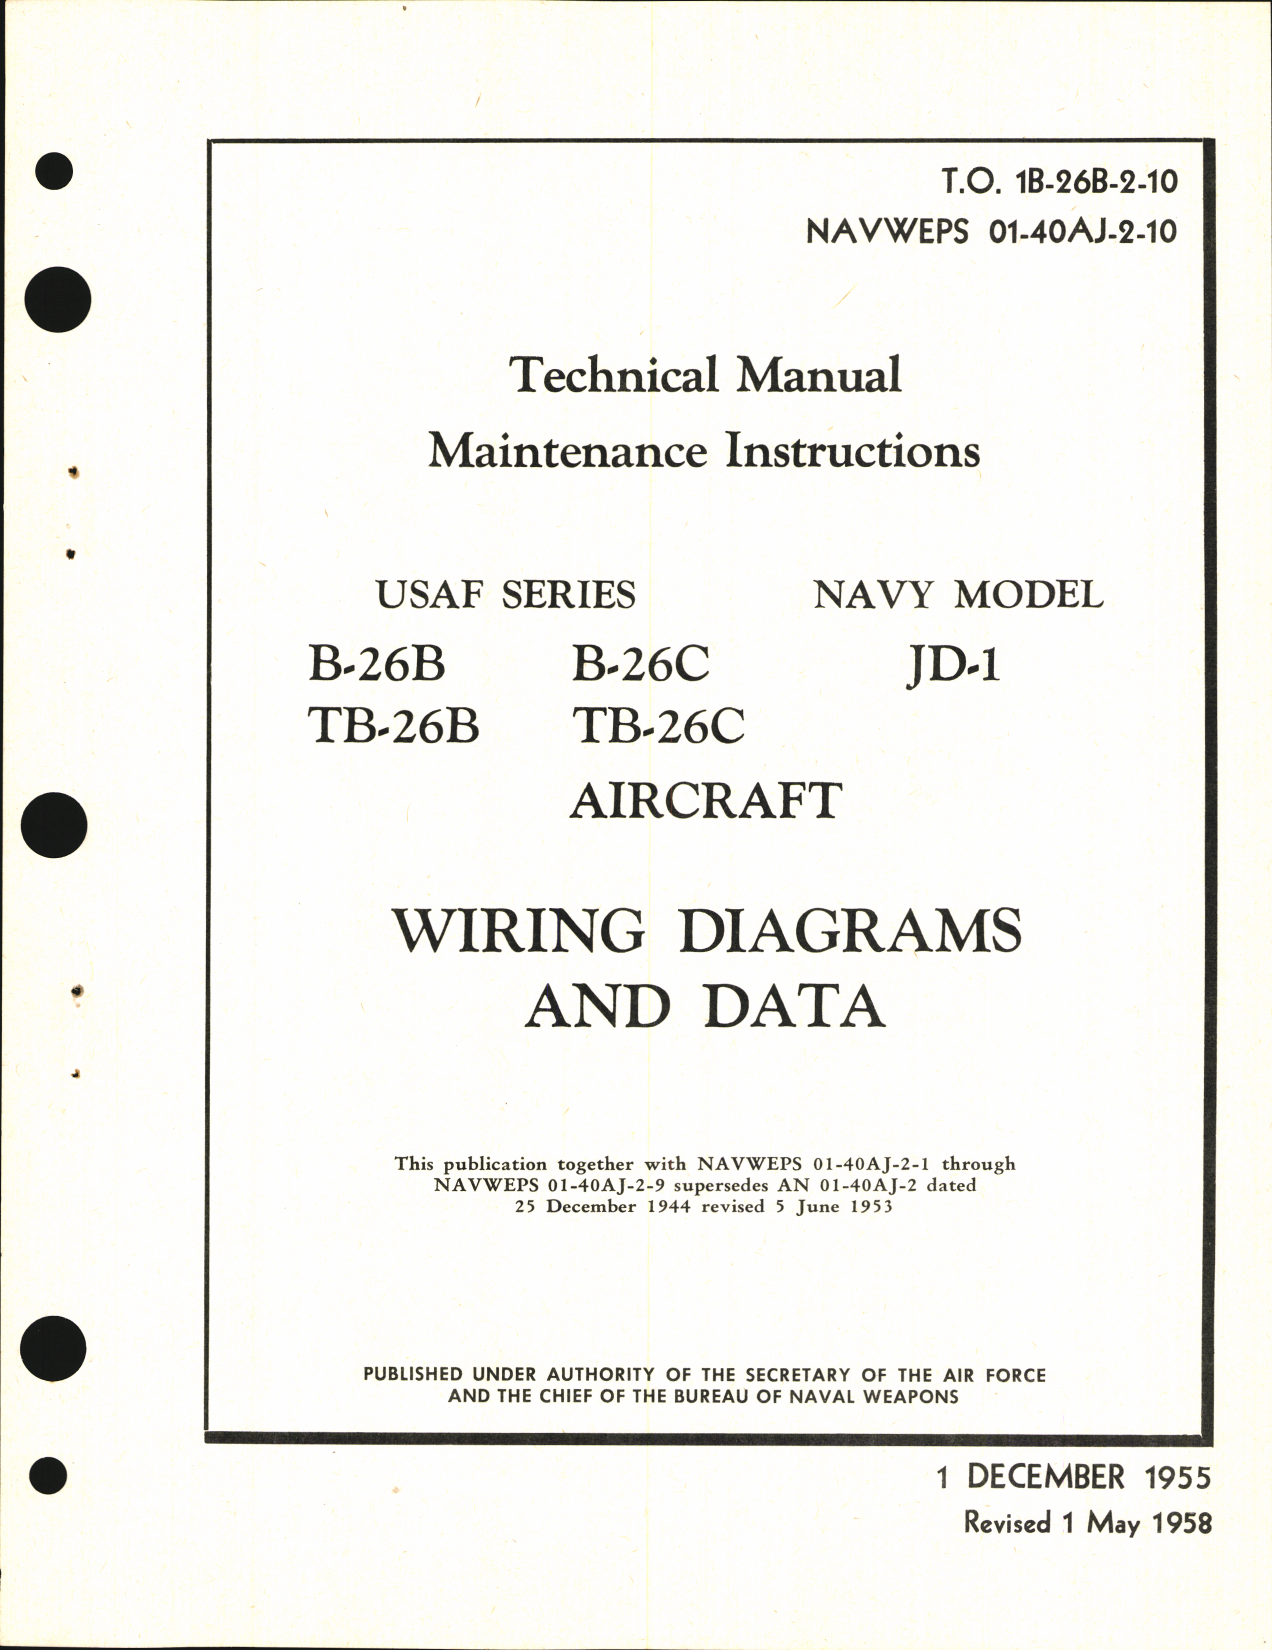 Sample page 1 from AirCorps Library document: Maintenance Instructions for B-26B, B-26C, TB-26B, TB-26C, and JD-1 - Wiring Diagrams and Data